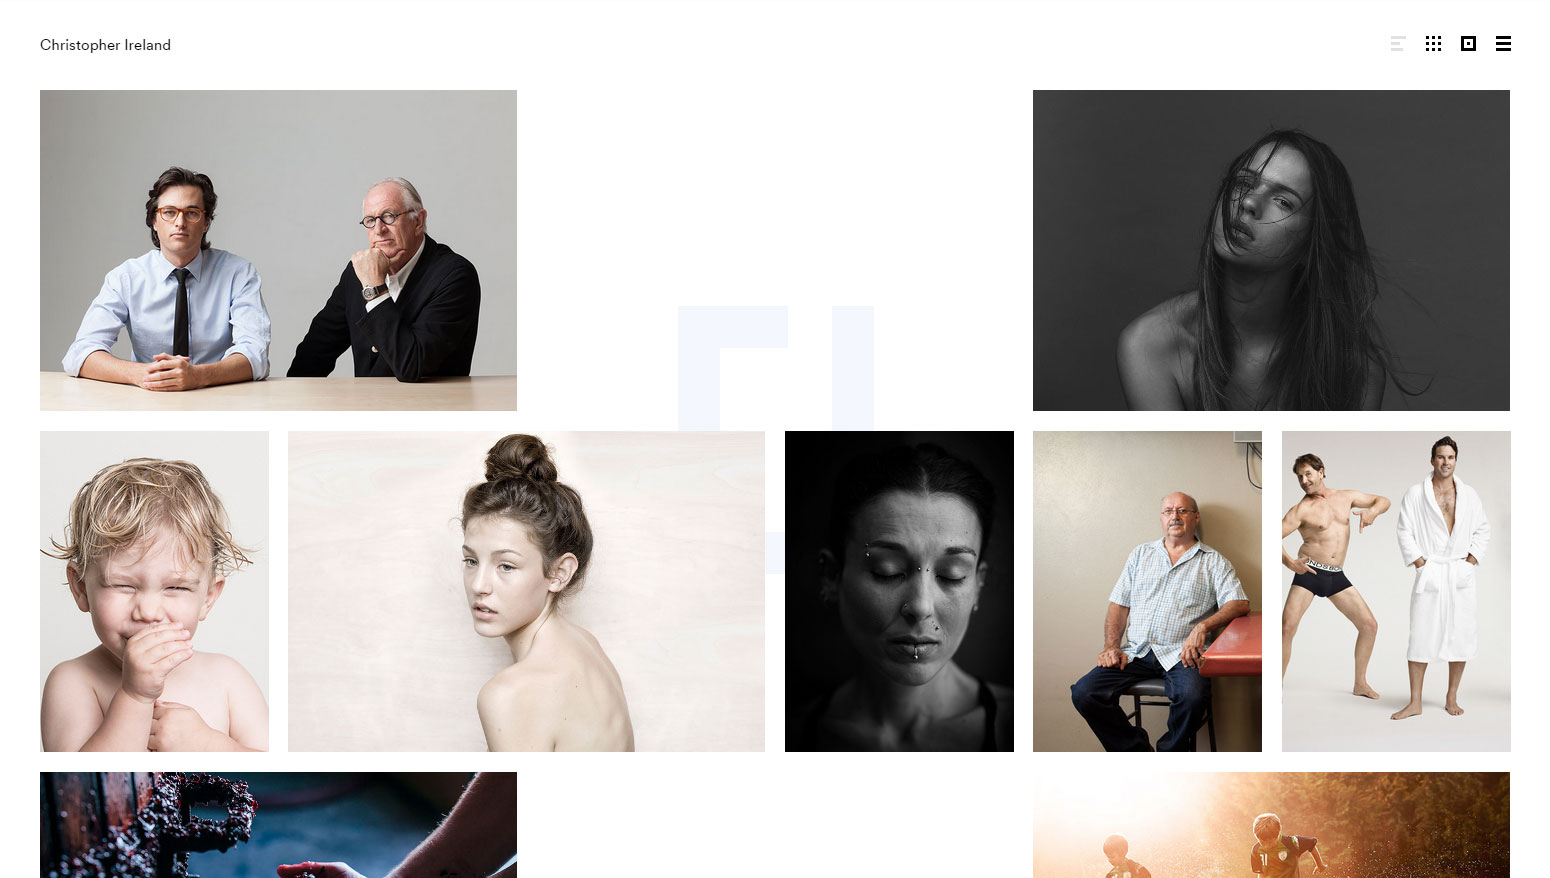 Christopher Ireland - Website of the Day